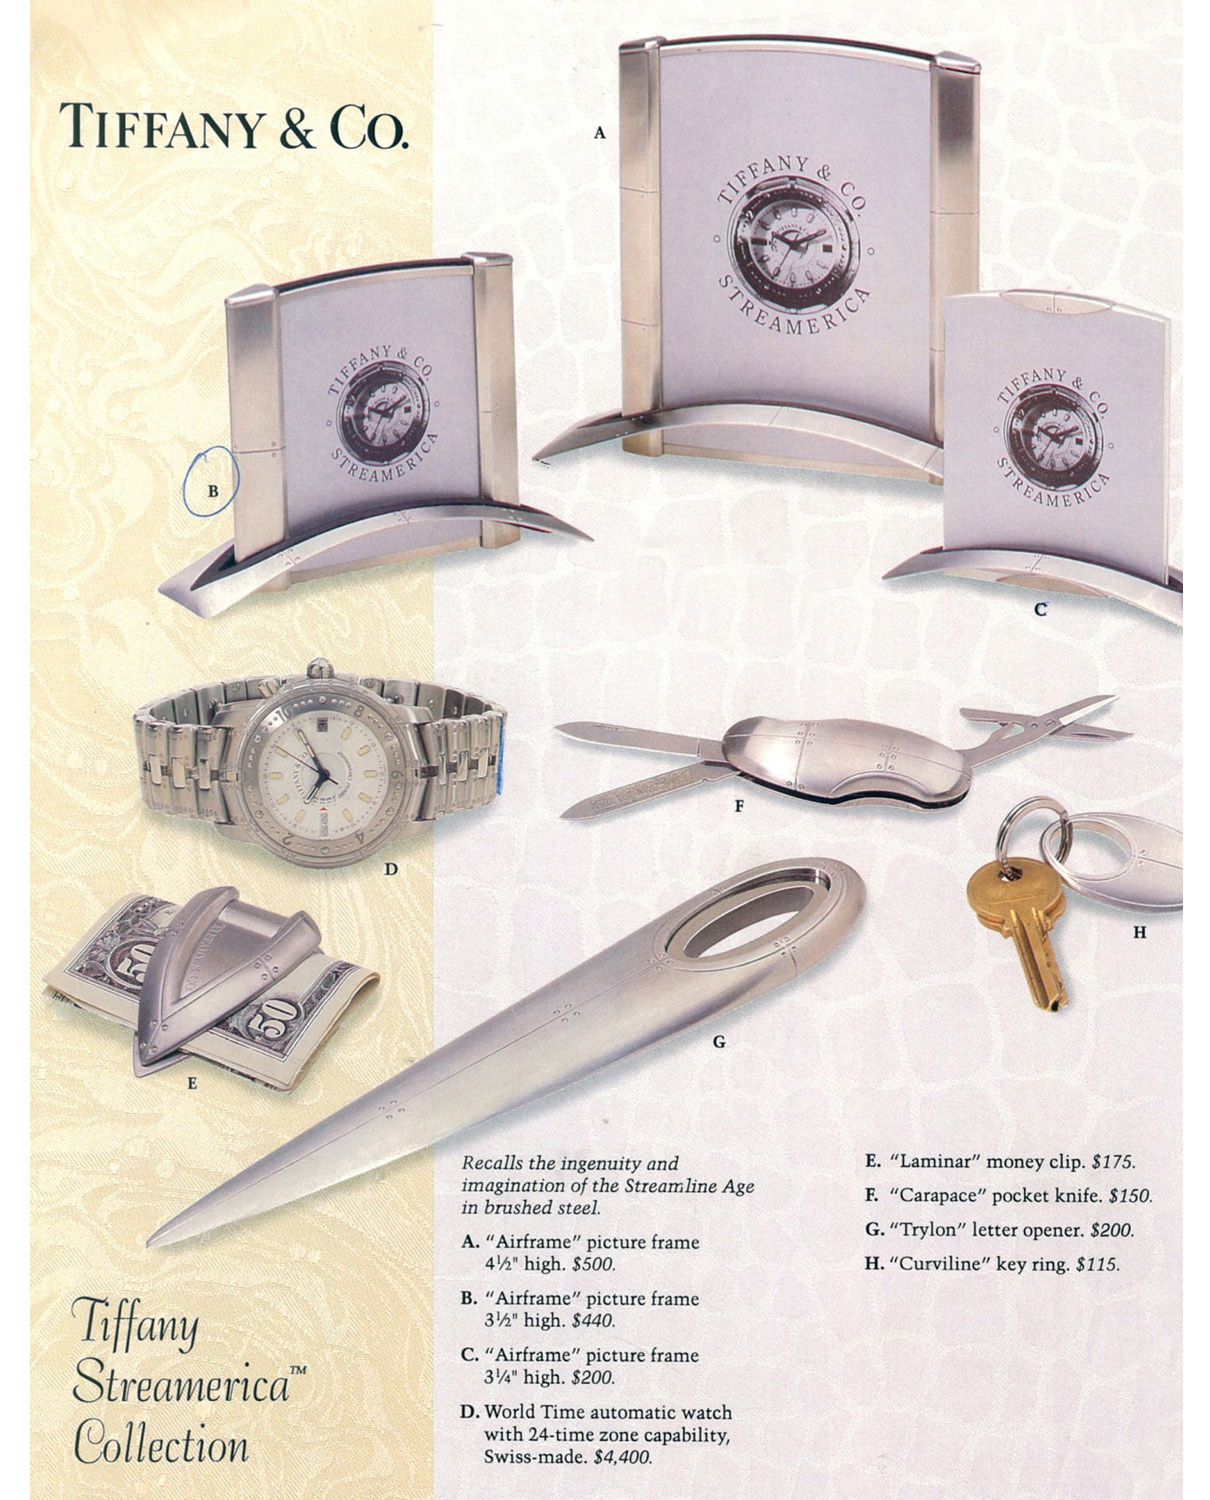 Page from a Yamrun jewelers catalog showcasing the Tiffany Streamerica Collection in 1993 in Stainless Steel.  Pictured here are the Airframe Picture Frames, The World Time Automatic Watch in all stainless steel, a smaller Carapace Pocket Knife, Laminar Money Clip, Trylon Letter Opener, and Curviline Key Ring, all with 1993 prices.